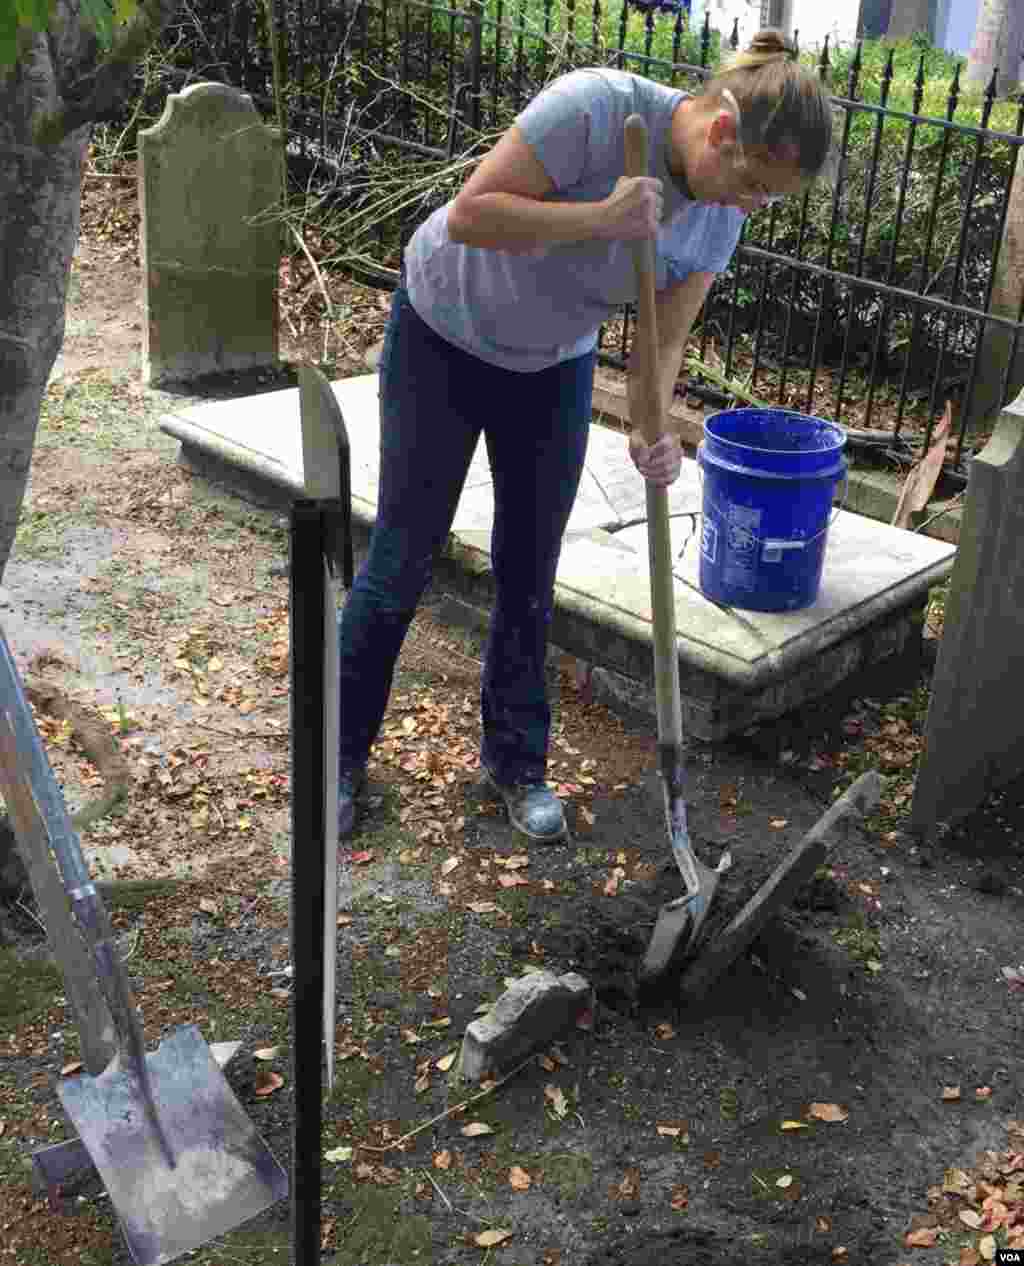 Leigh Yarbrough, a student at the American College of the Building Arts, restores a tombstone at a historic cemetery in Charleston, S.C. (J. Taboh/VOA News)